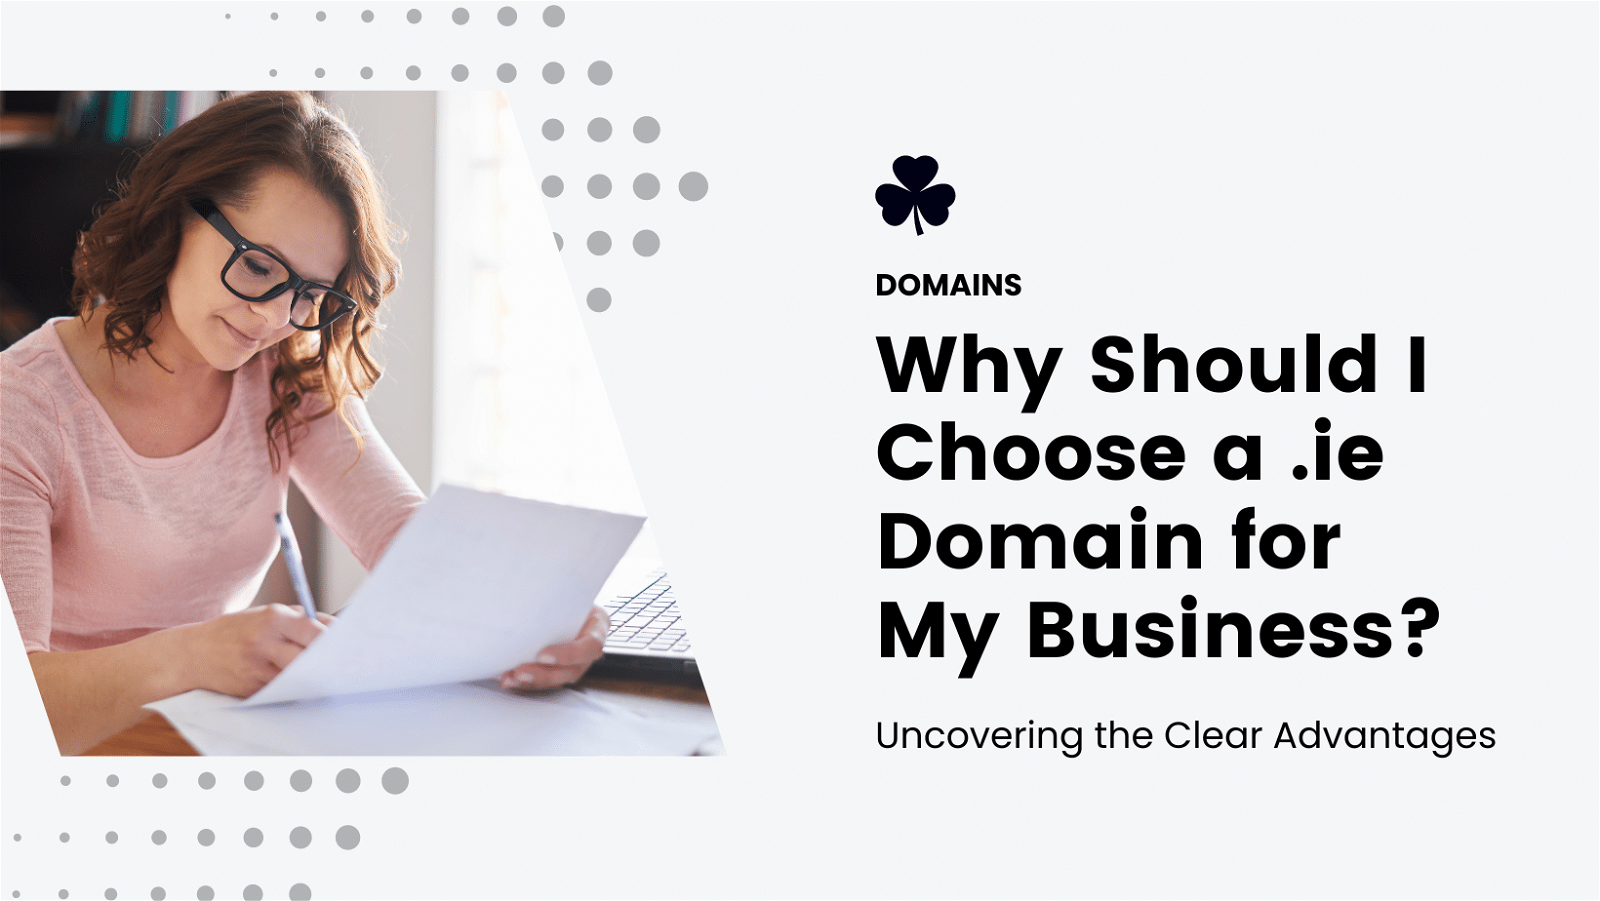 Why should i choose a domain ie for my business?.